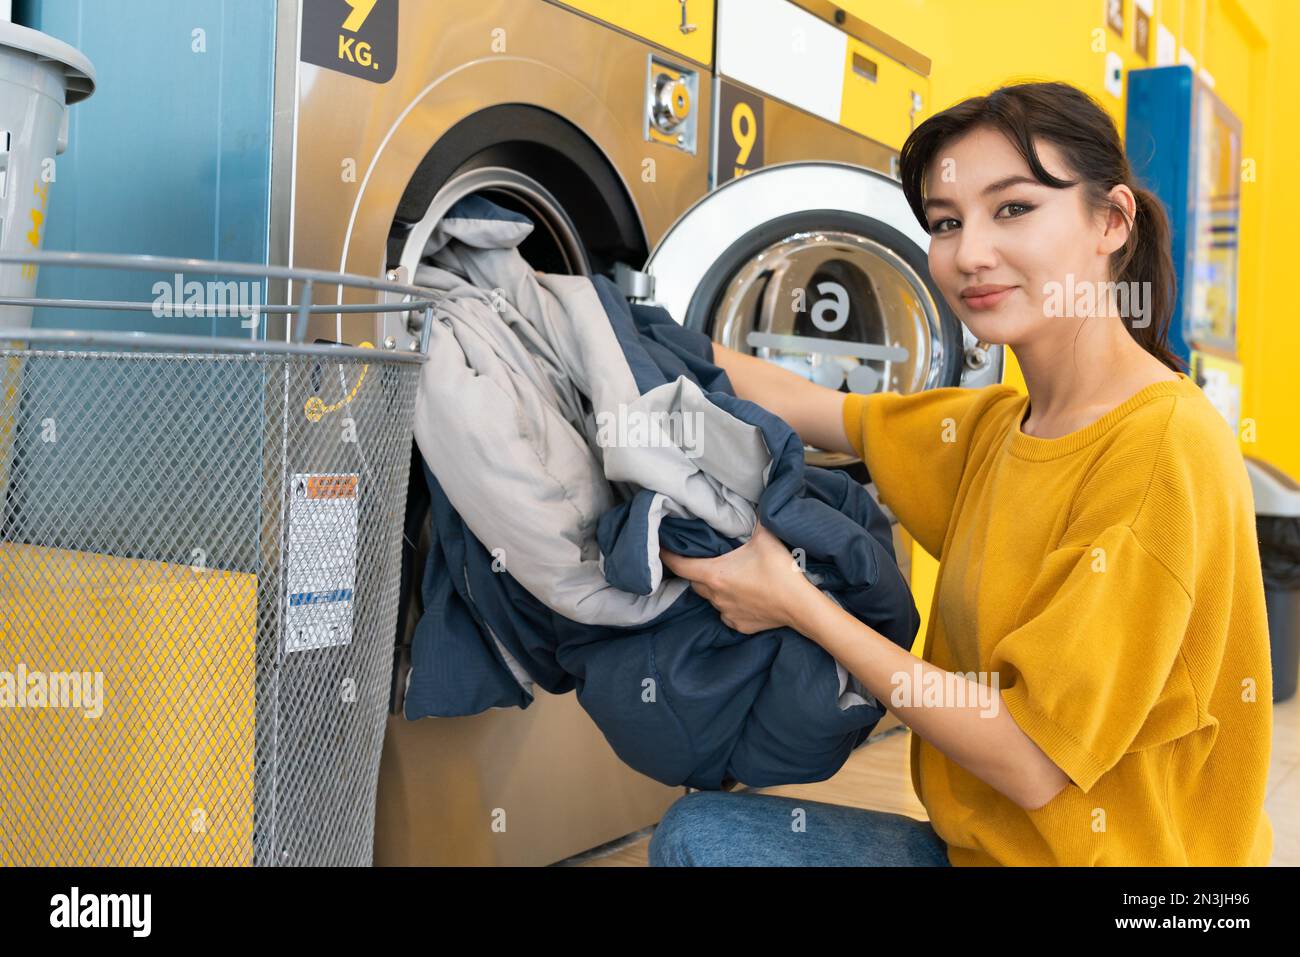 Asian people using qualified coin operated laundry machine in the public room to wash their cloths. Concept of a self service commercial laundry and Stock Photo